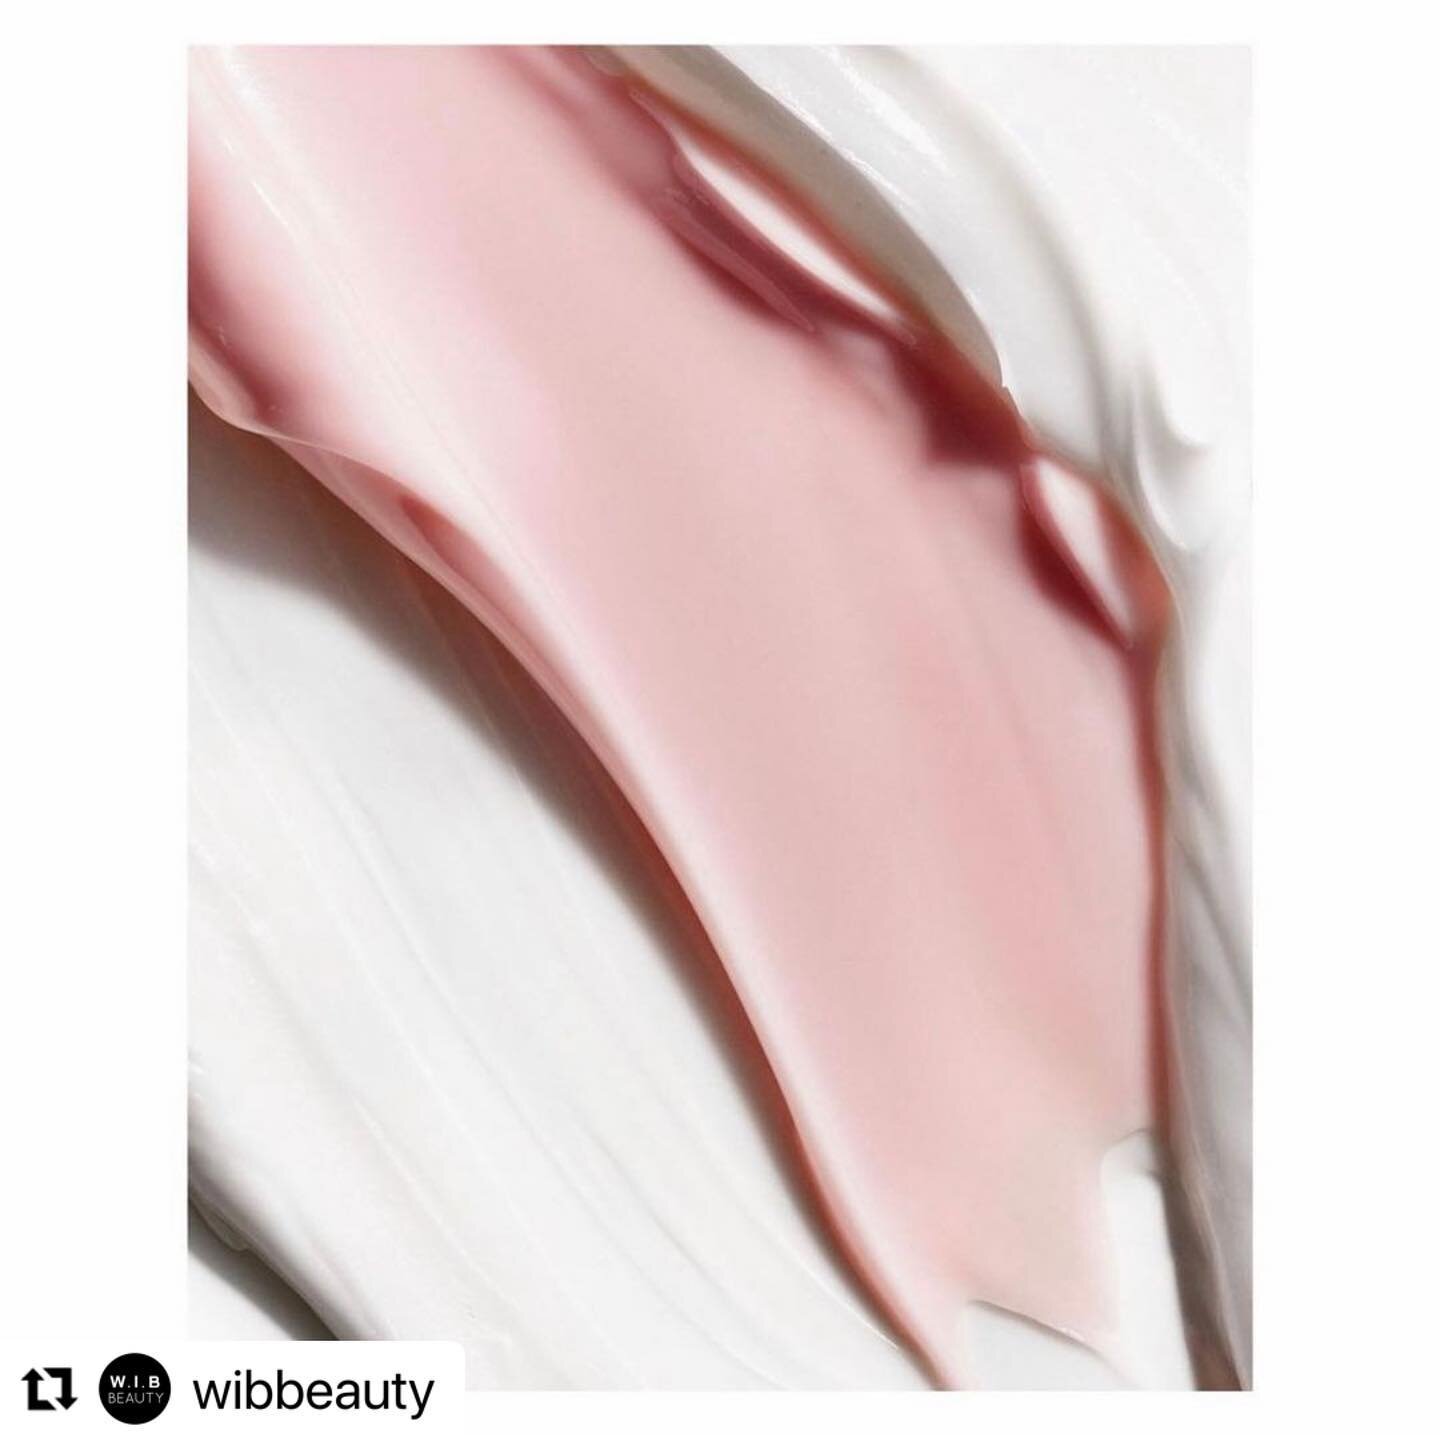 #Repost @wibbeauty with @use.repost
・・・
@richbeganyphoto for @josiemaran 

Styled by: attenborough_beauty 

#skincarephotography #productphotography #productphotographer #beautyphotographer #testshoot #productshoot @_theaxe_